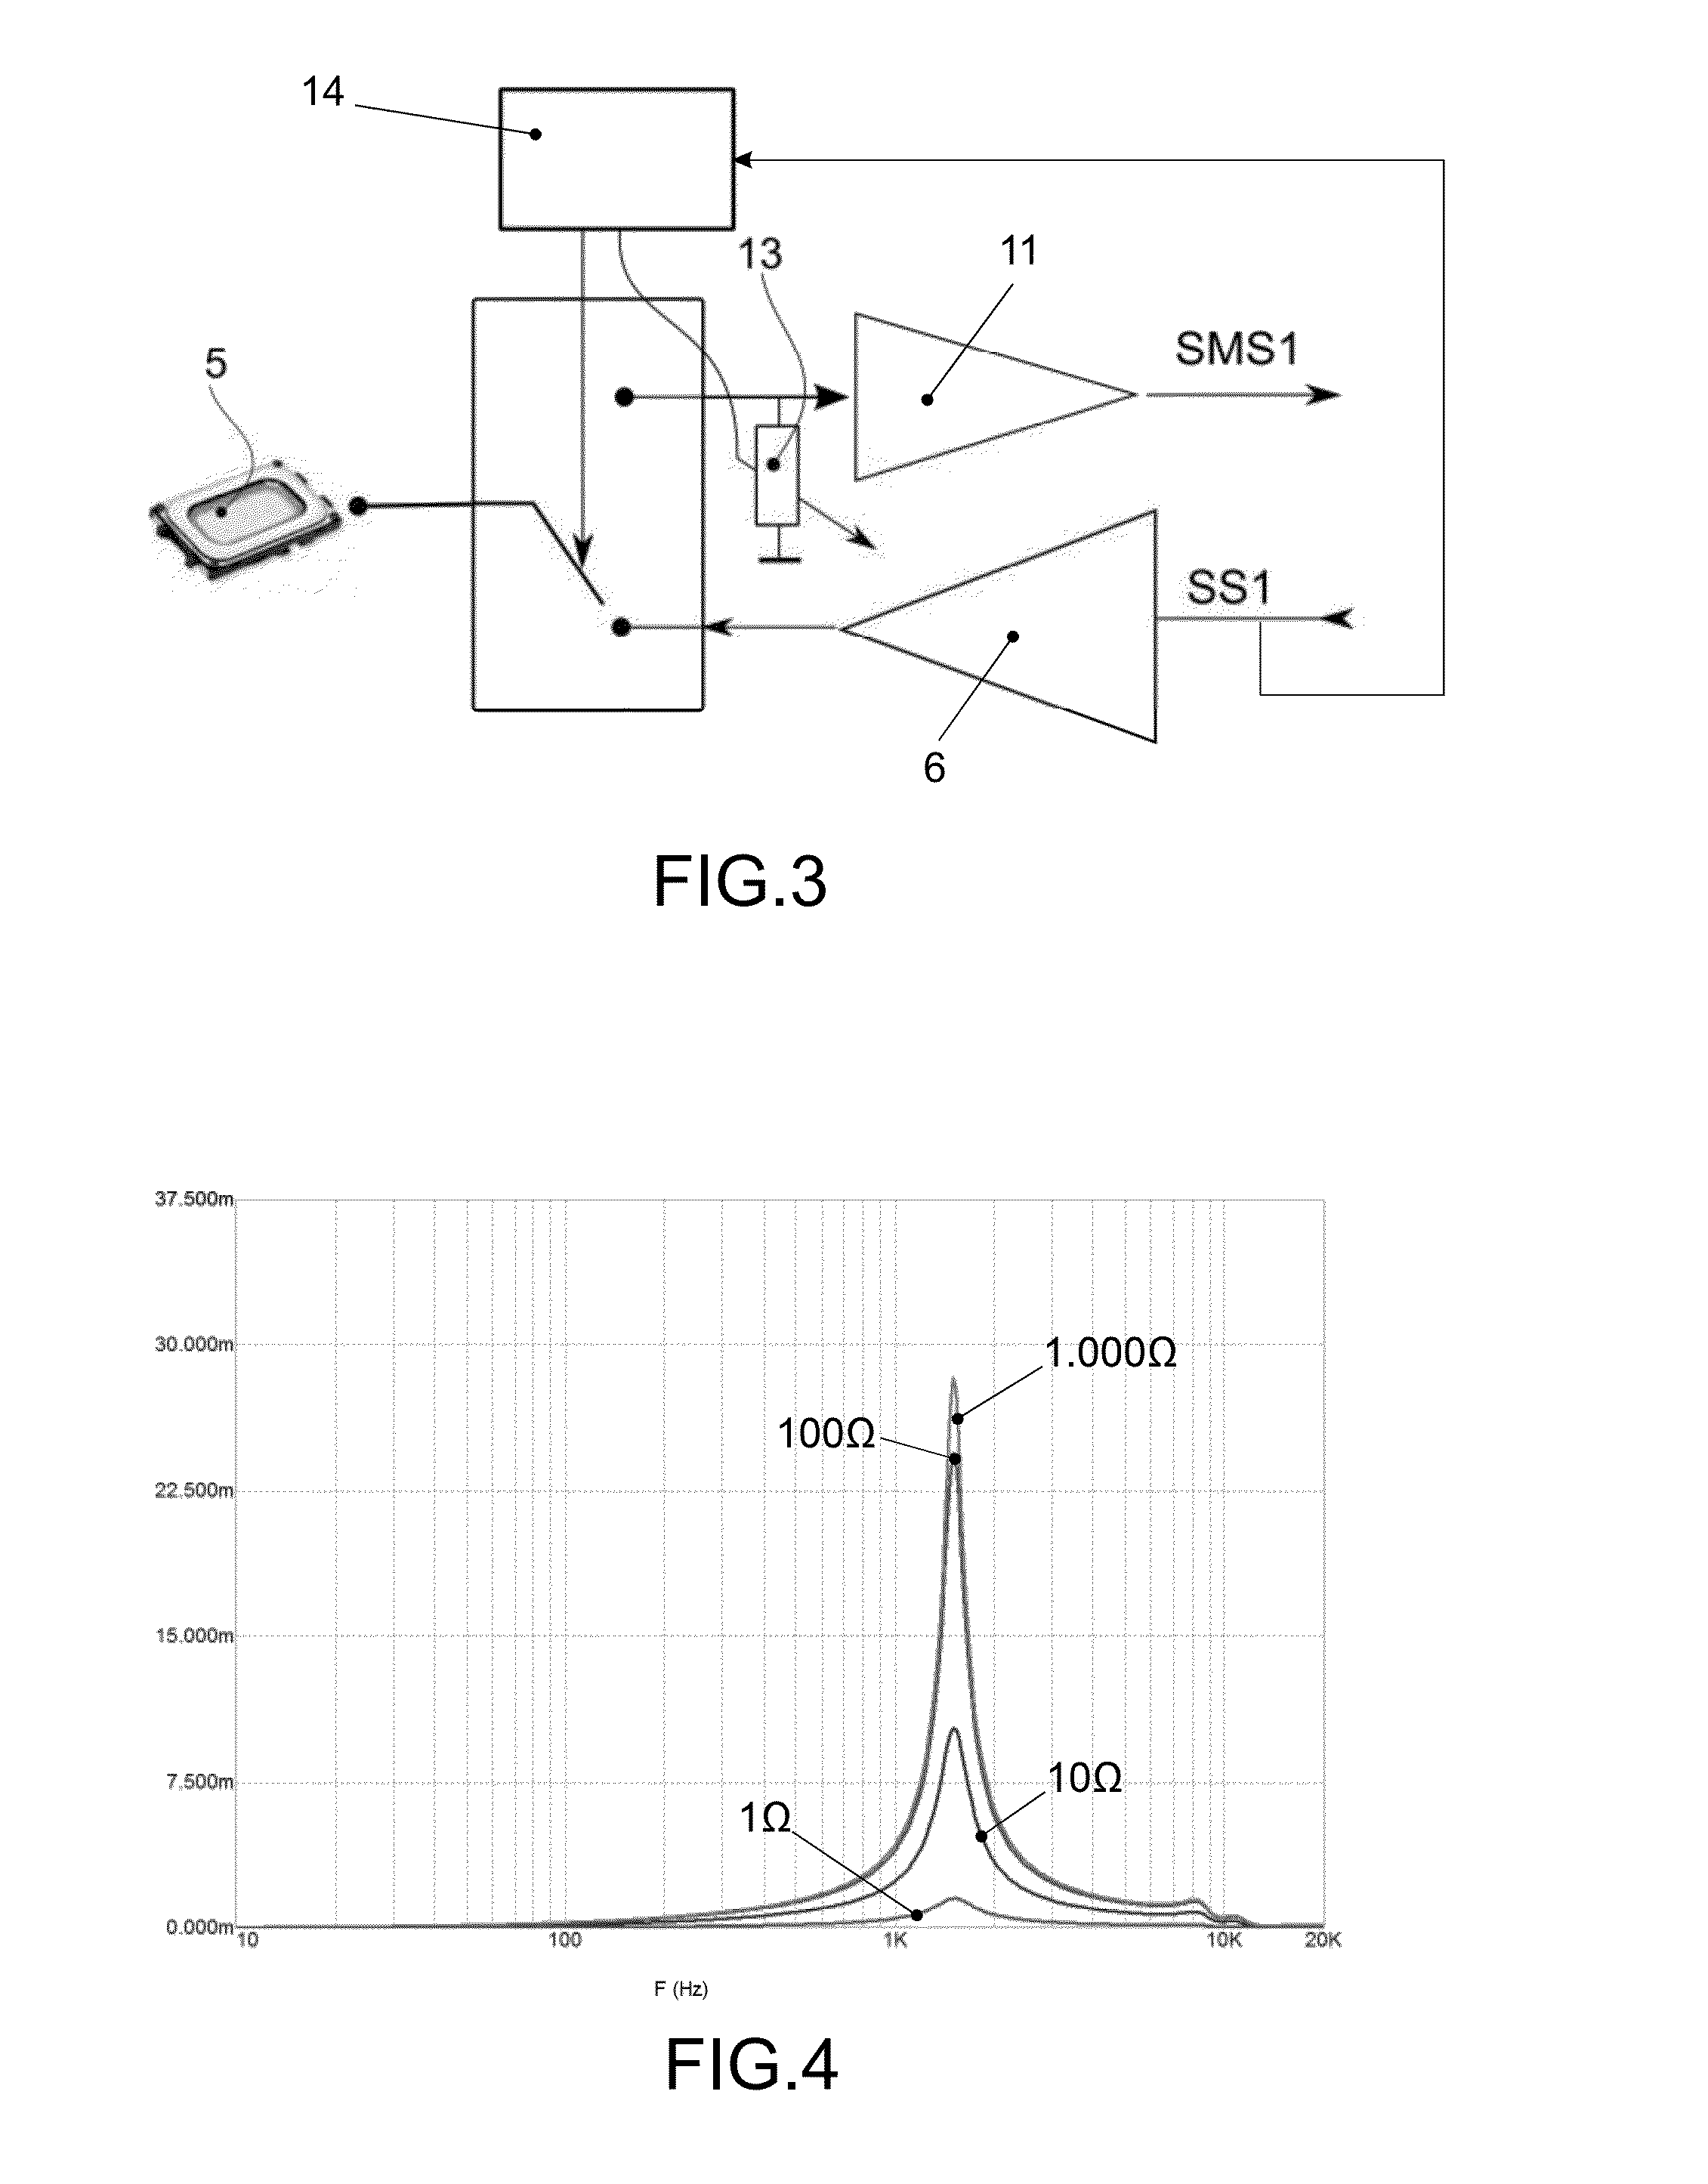 Apparatus with a speaker used as second microphone